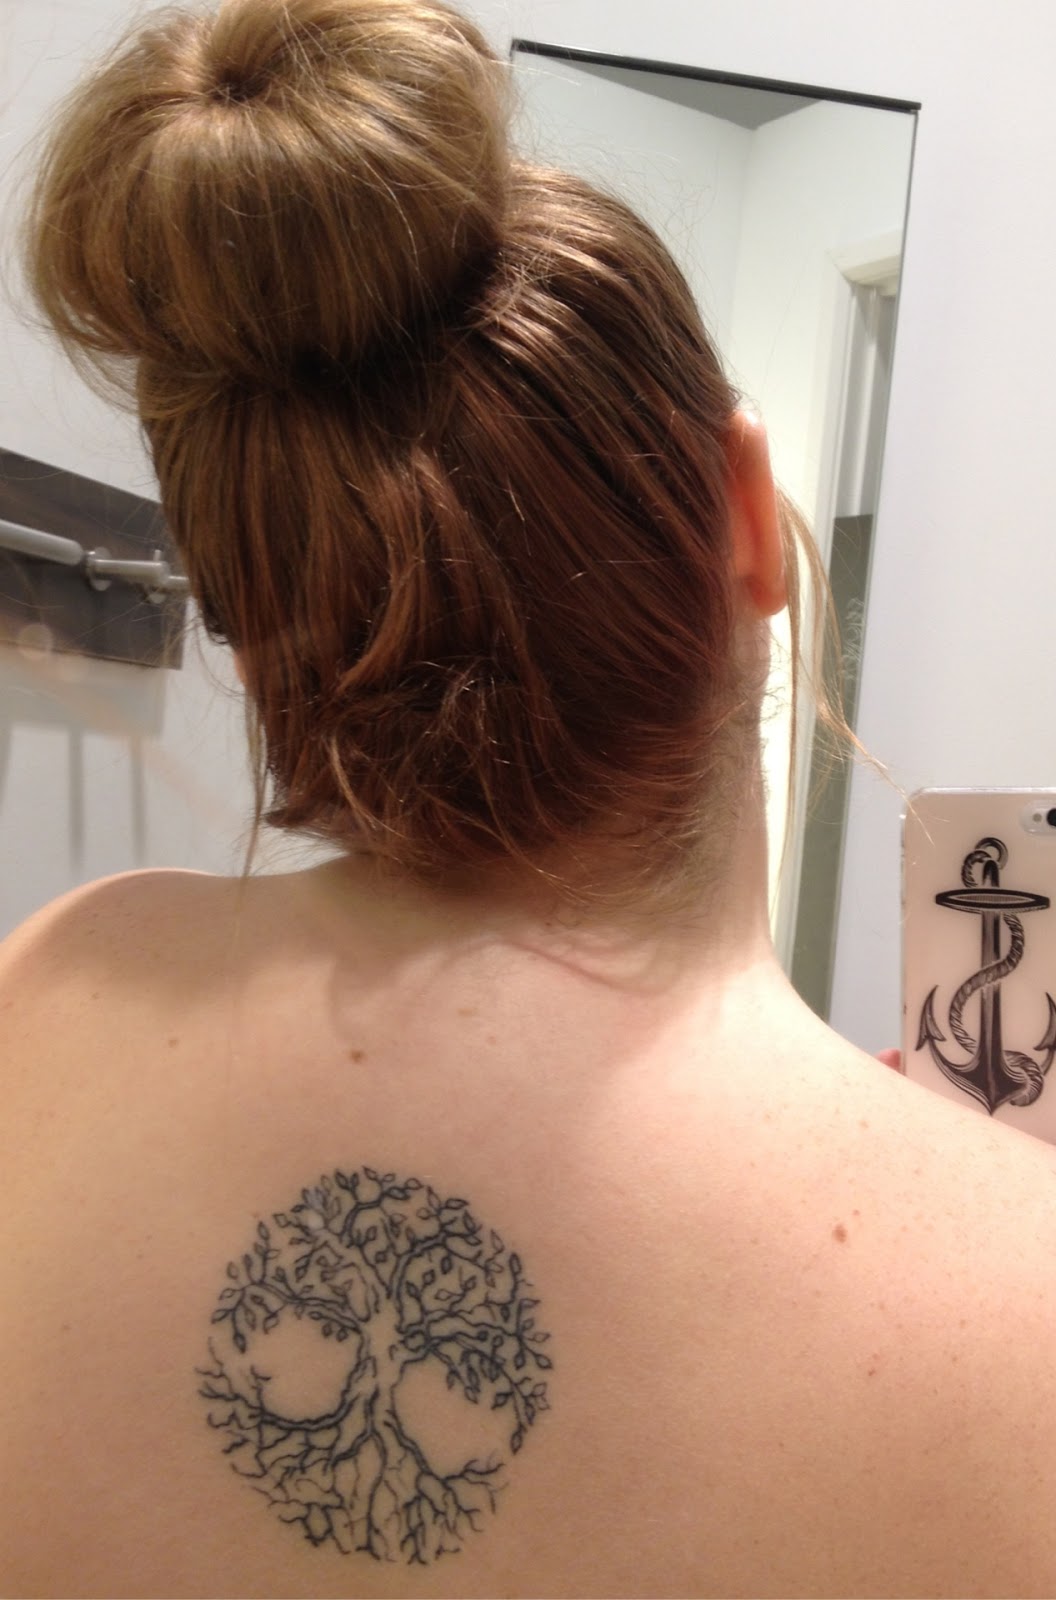 Simple Small Tree Of Life Tattoo On Girl Upper Back